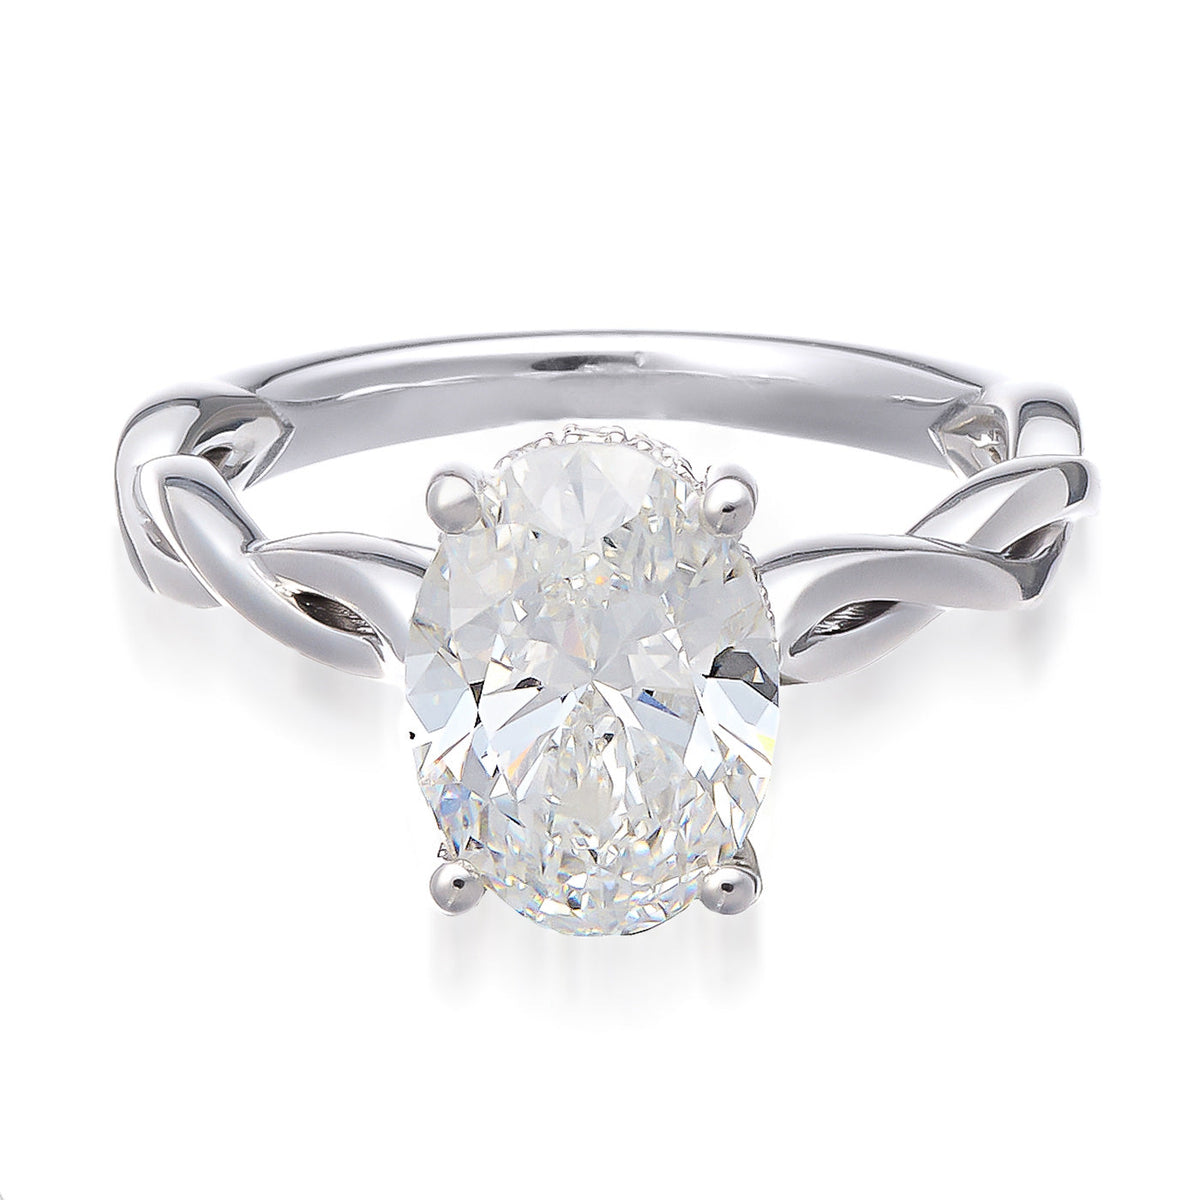 Ring in 14K White Gold with Brilliant